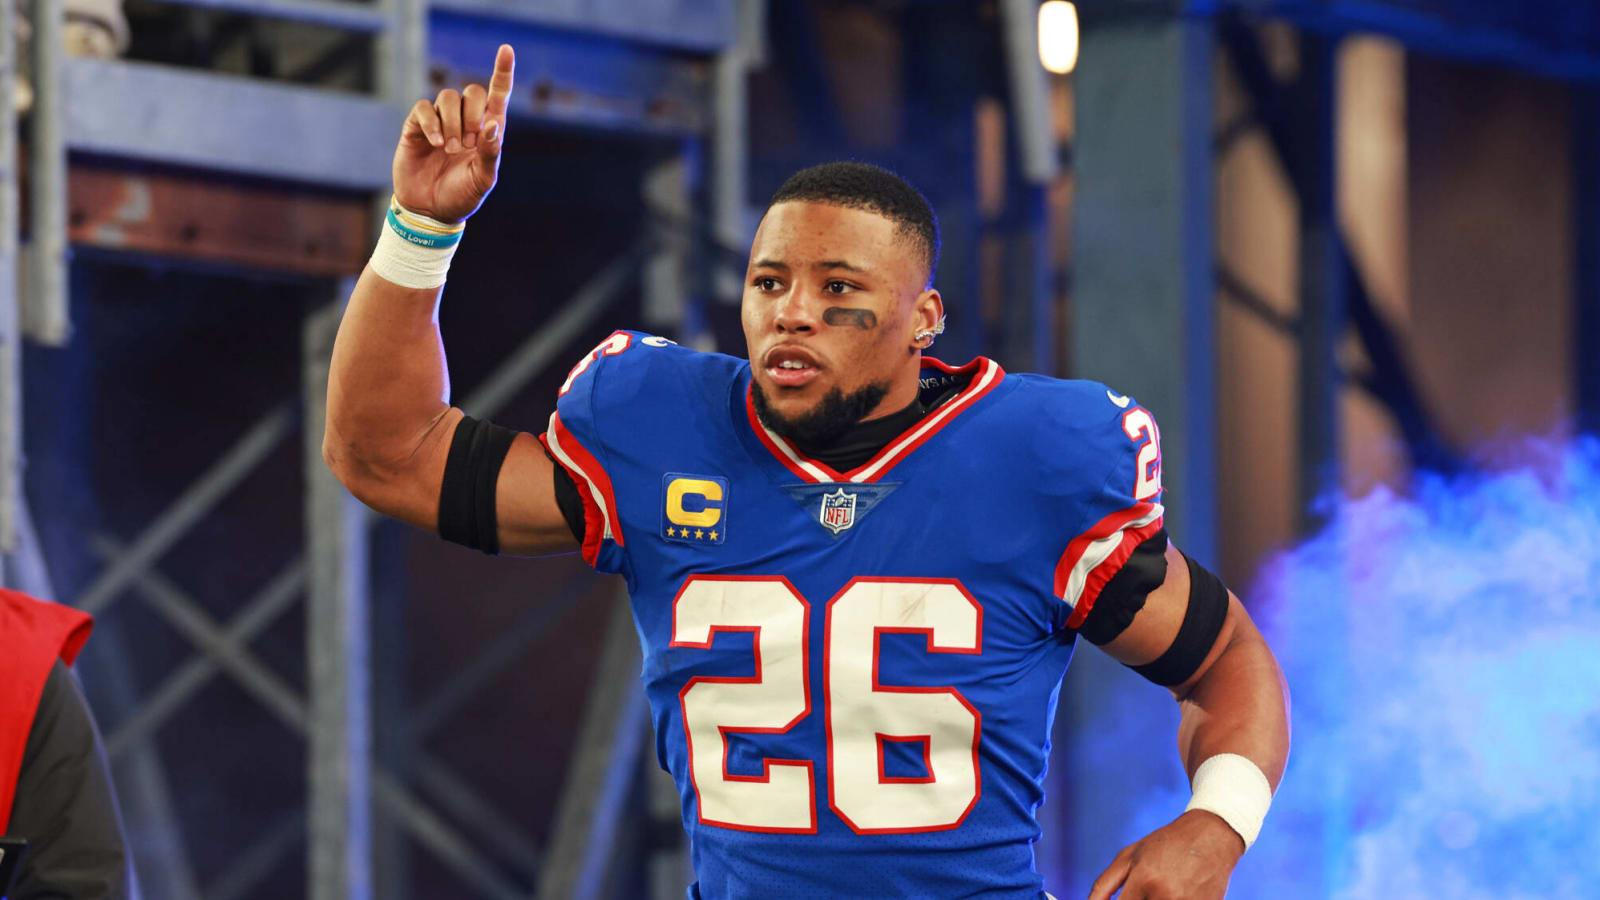 Former Jets LB rips Giants for treatment of Saquon Barkley